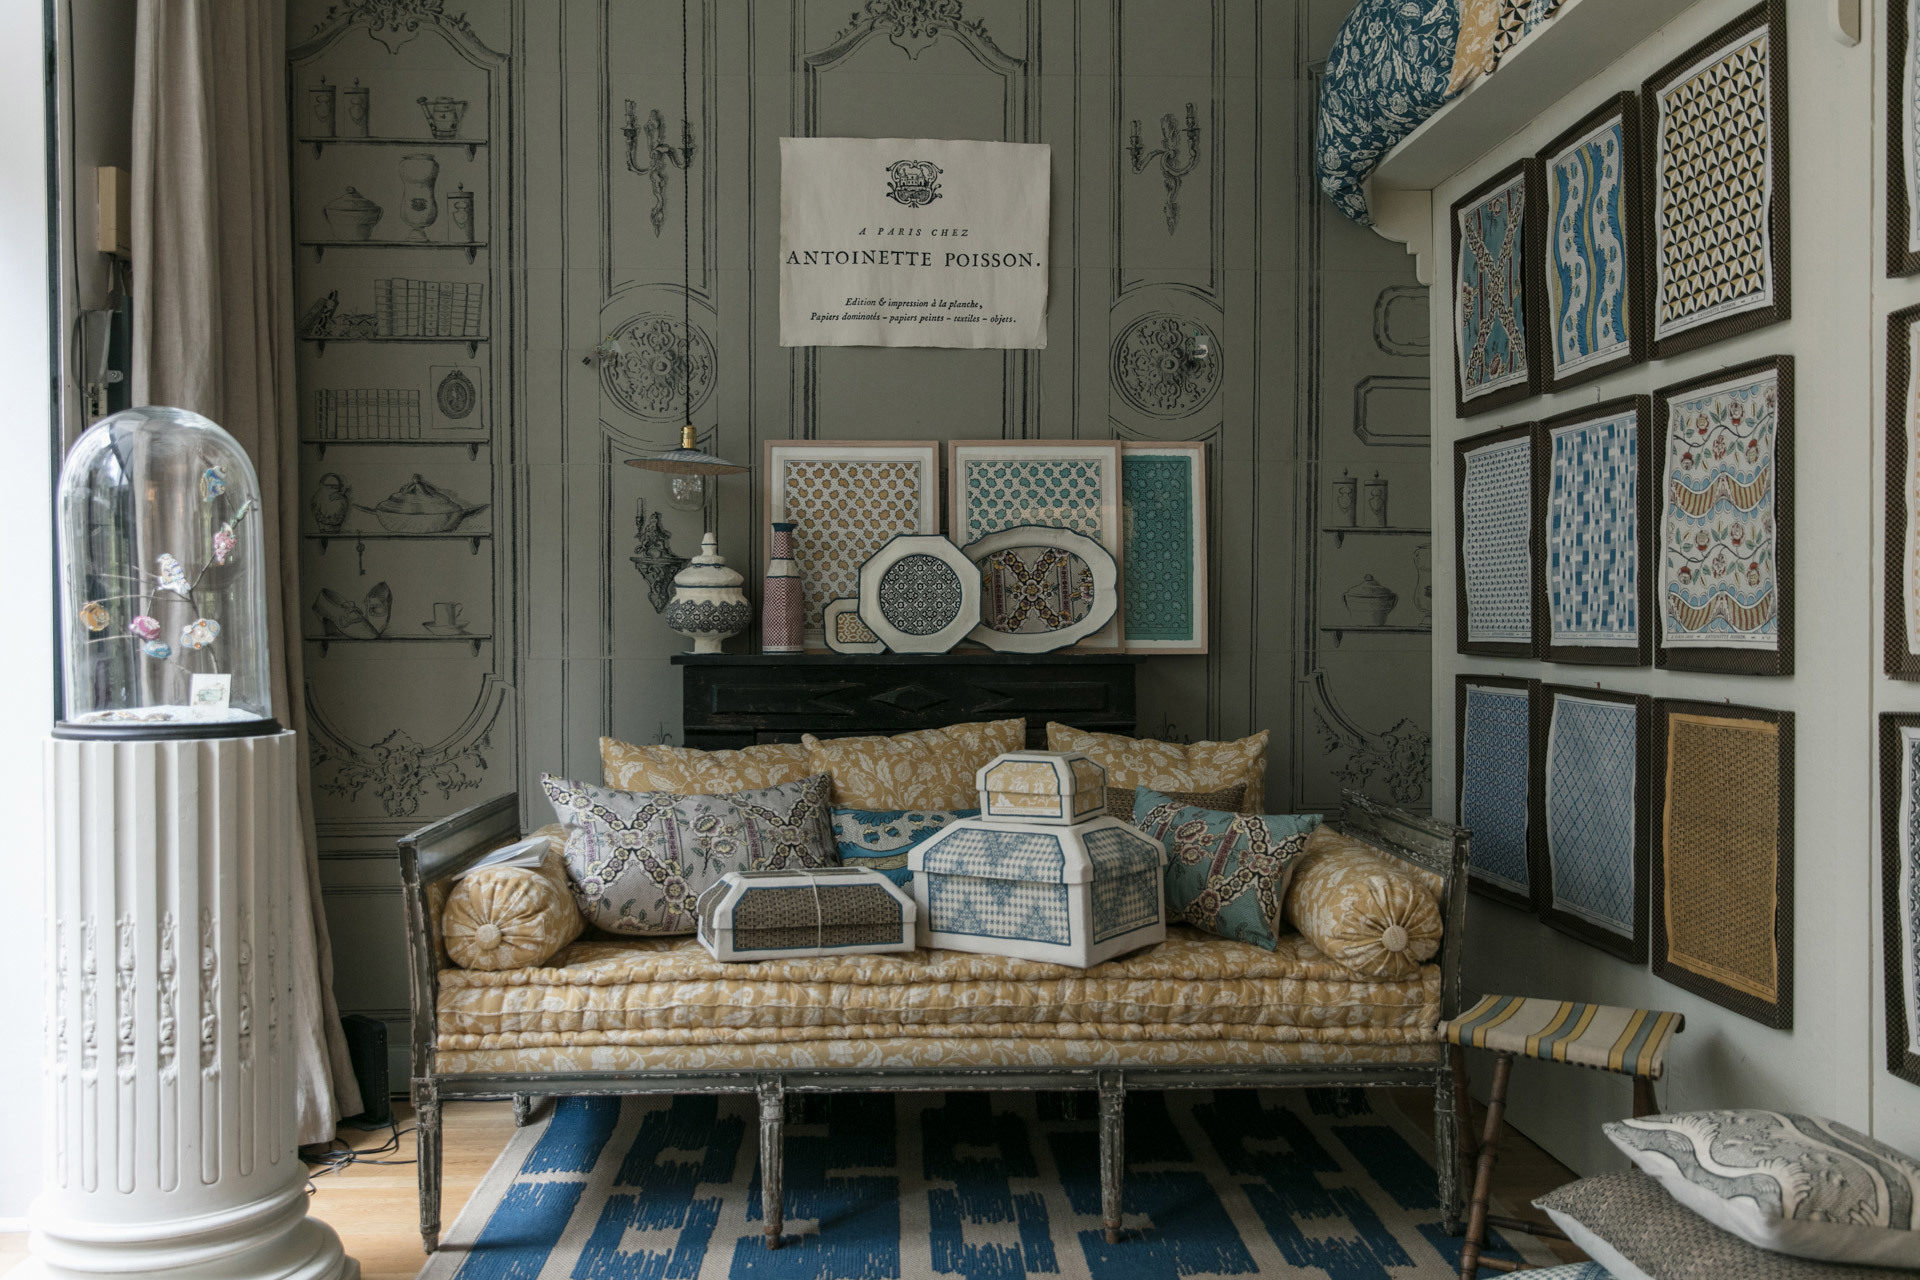 HOW FRENCH ANTOINETTE POISSON WALLPAPERS  STYLEBEAT